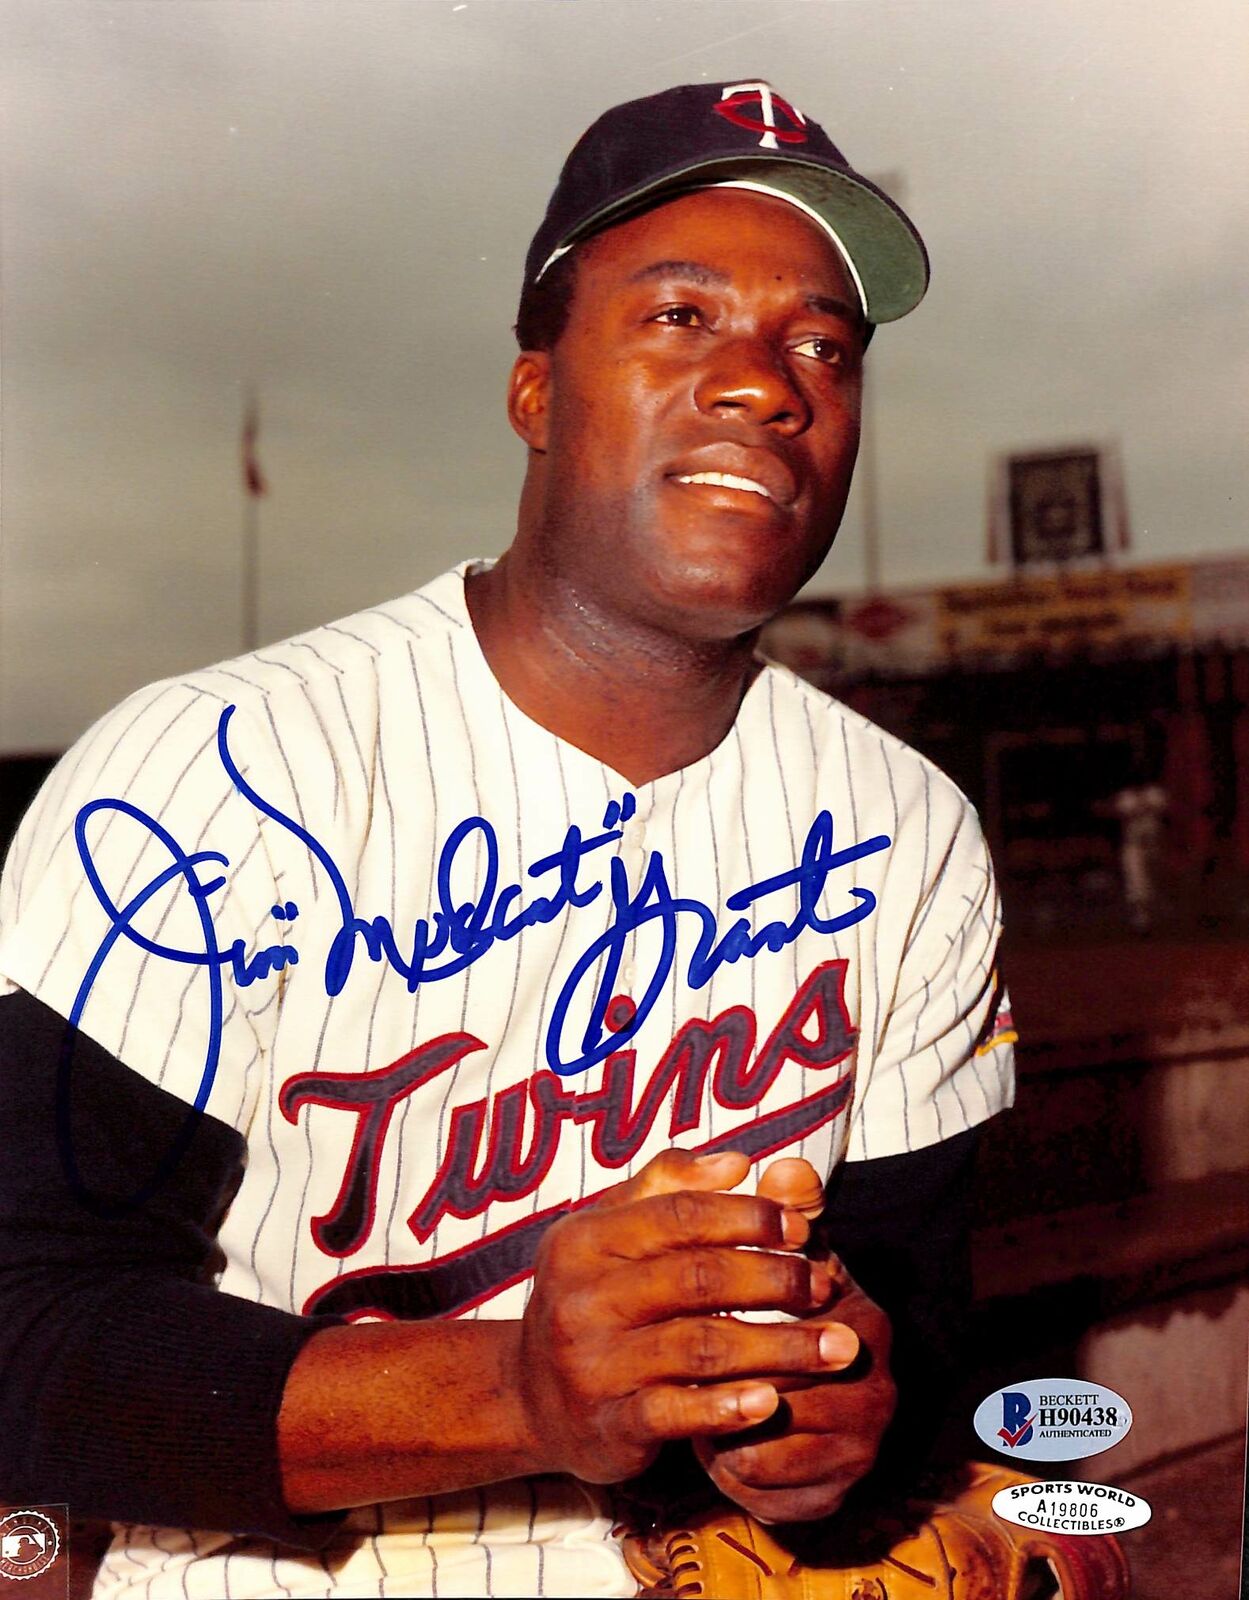 Twins Jim Mudcat Grant Authentic Signed 8x10 Photo Poster painting Autographed BAS